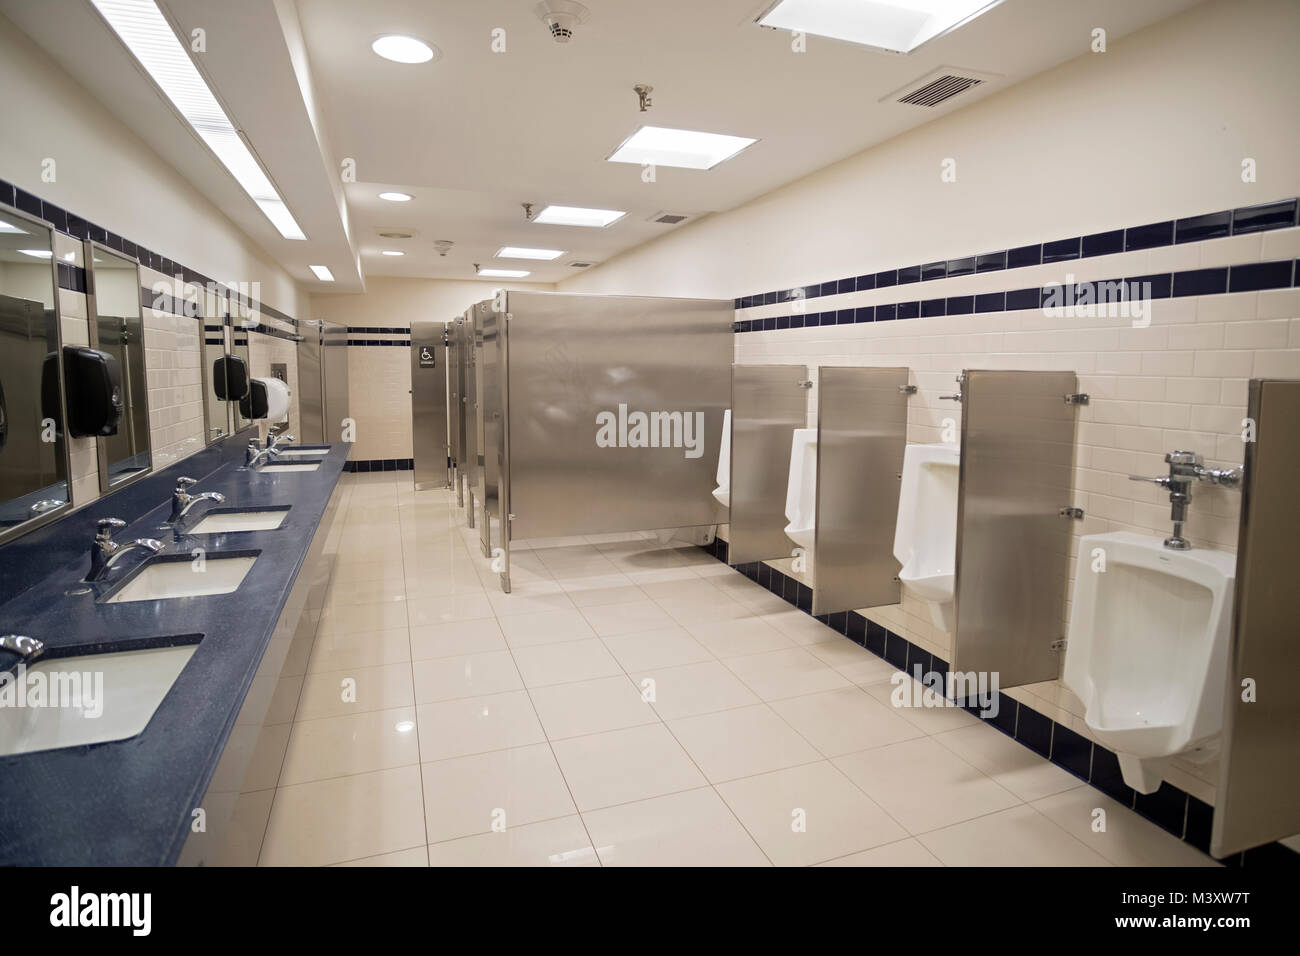 The men's room at Macy's department store in Manhasset, Long Island, New York. Stock Photo